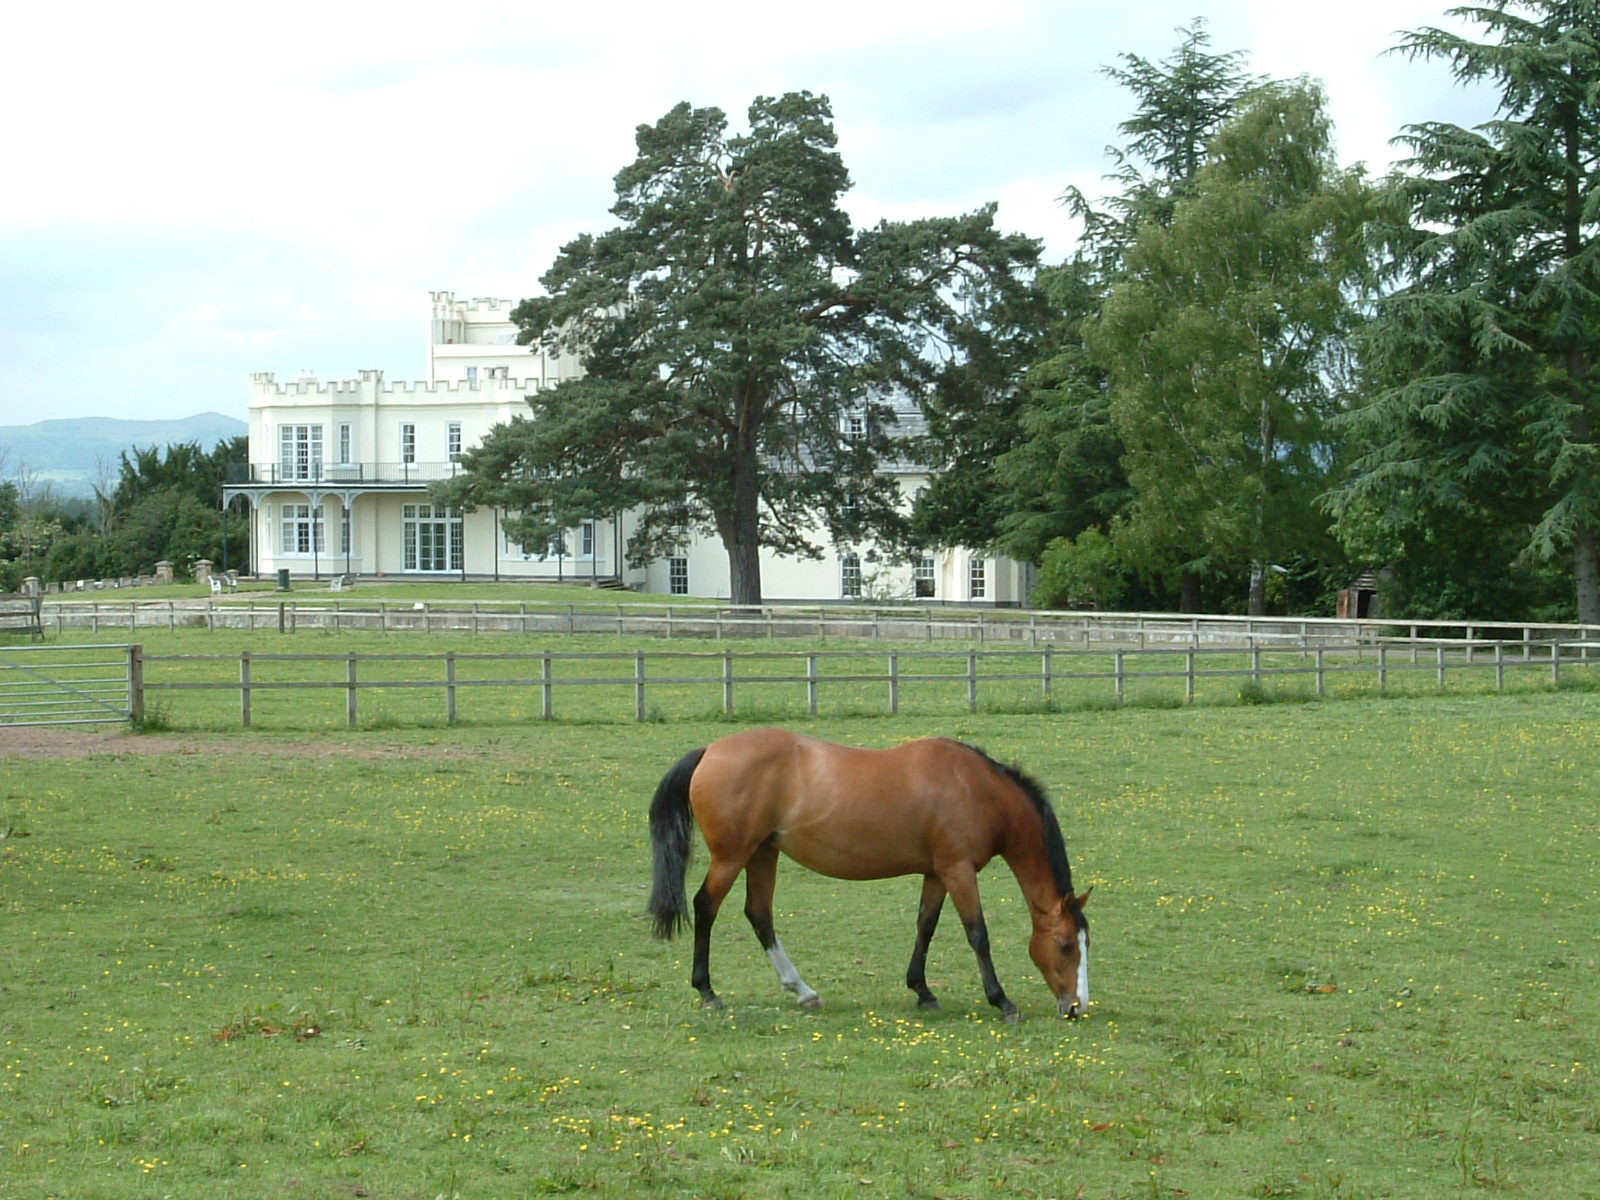 A horse grazing in front of Severn Bank